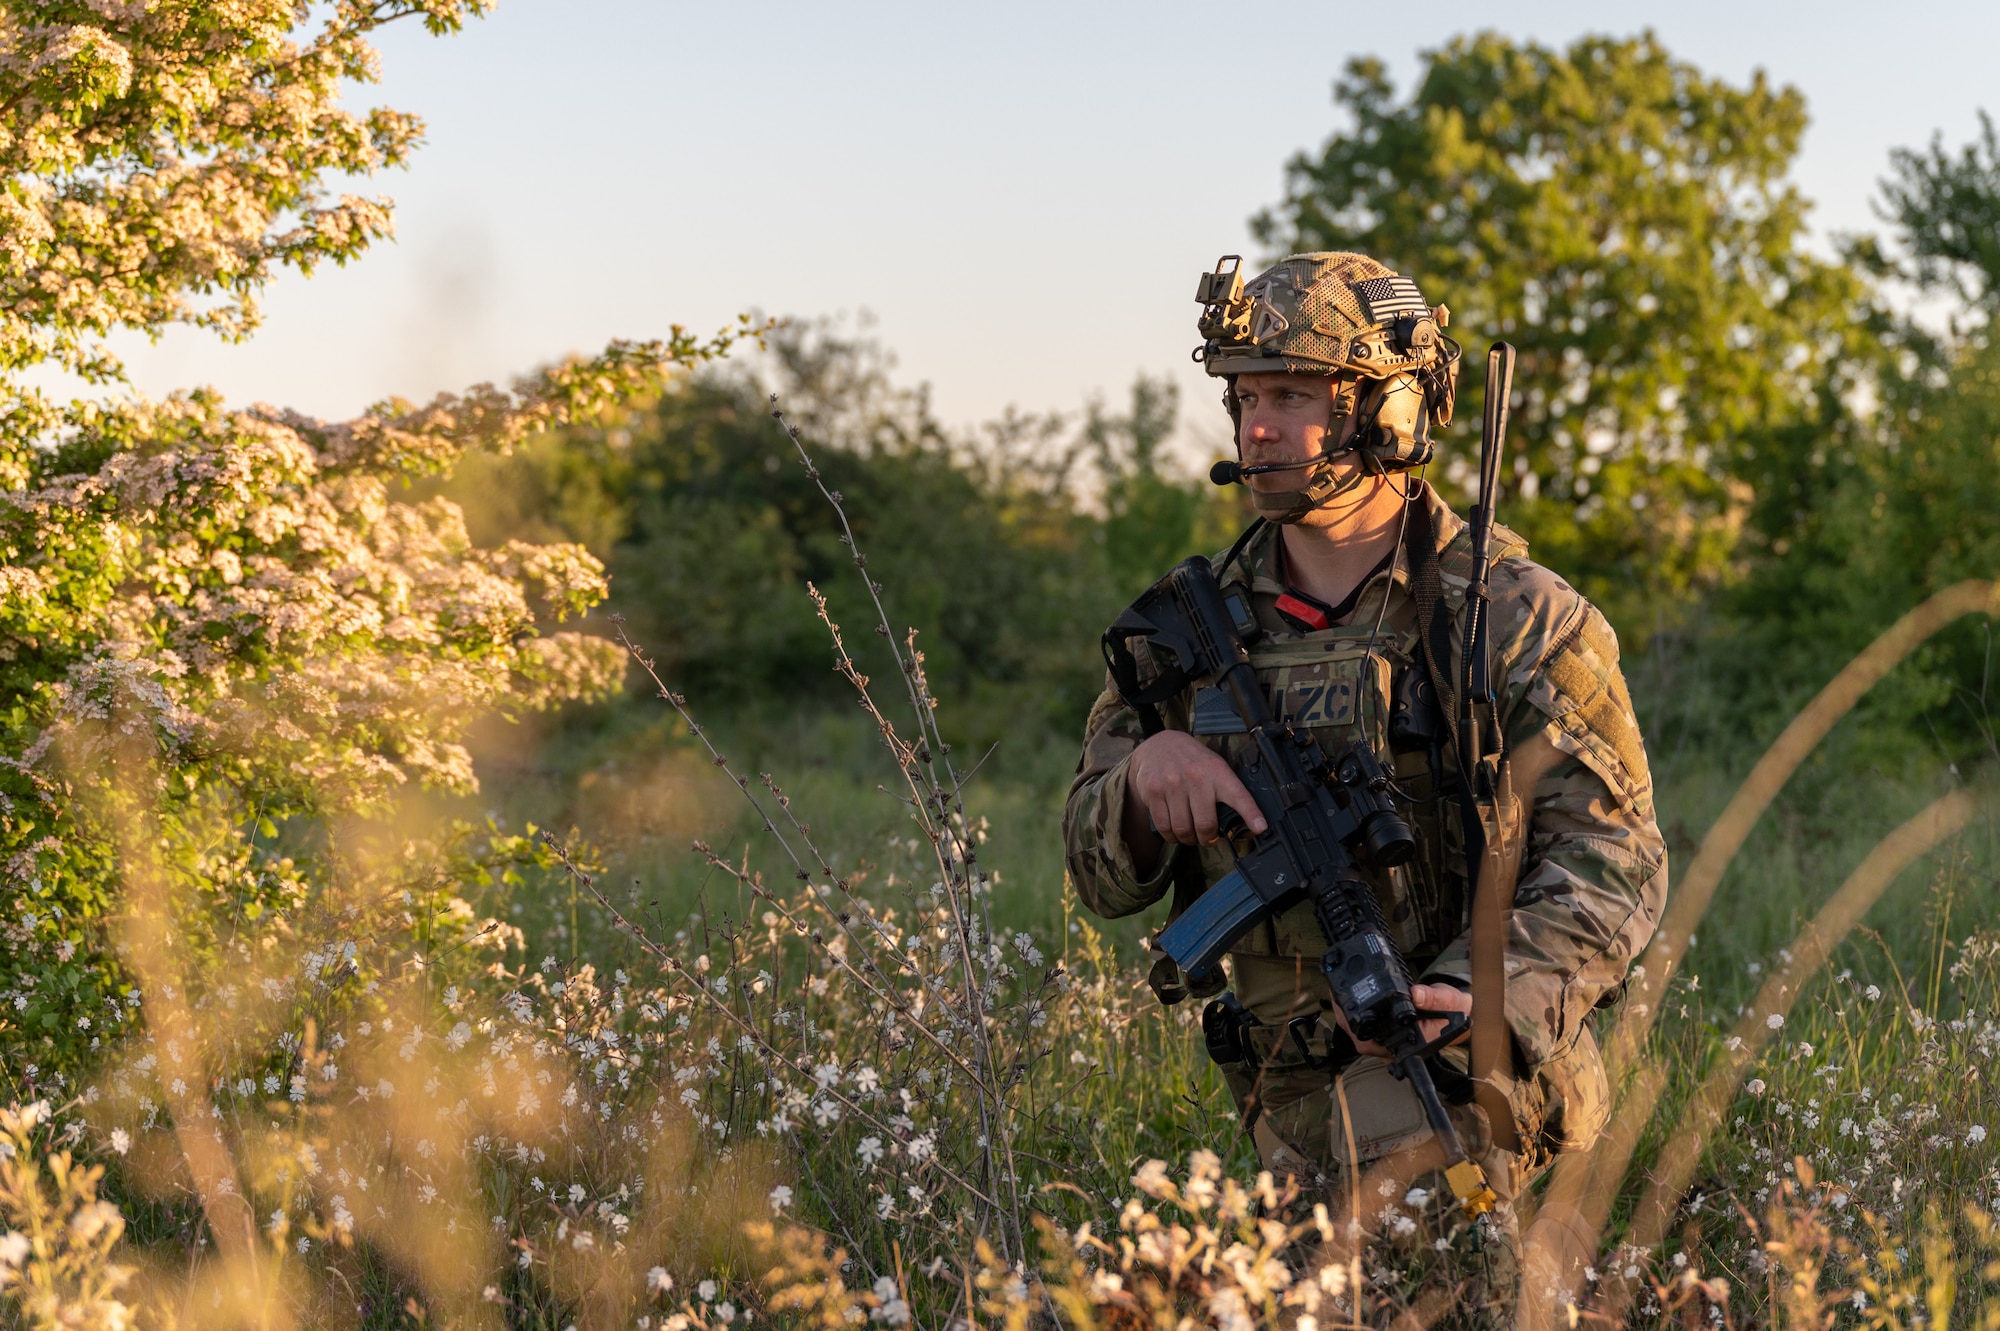 An Airman standing in a field, holding a weapon.